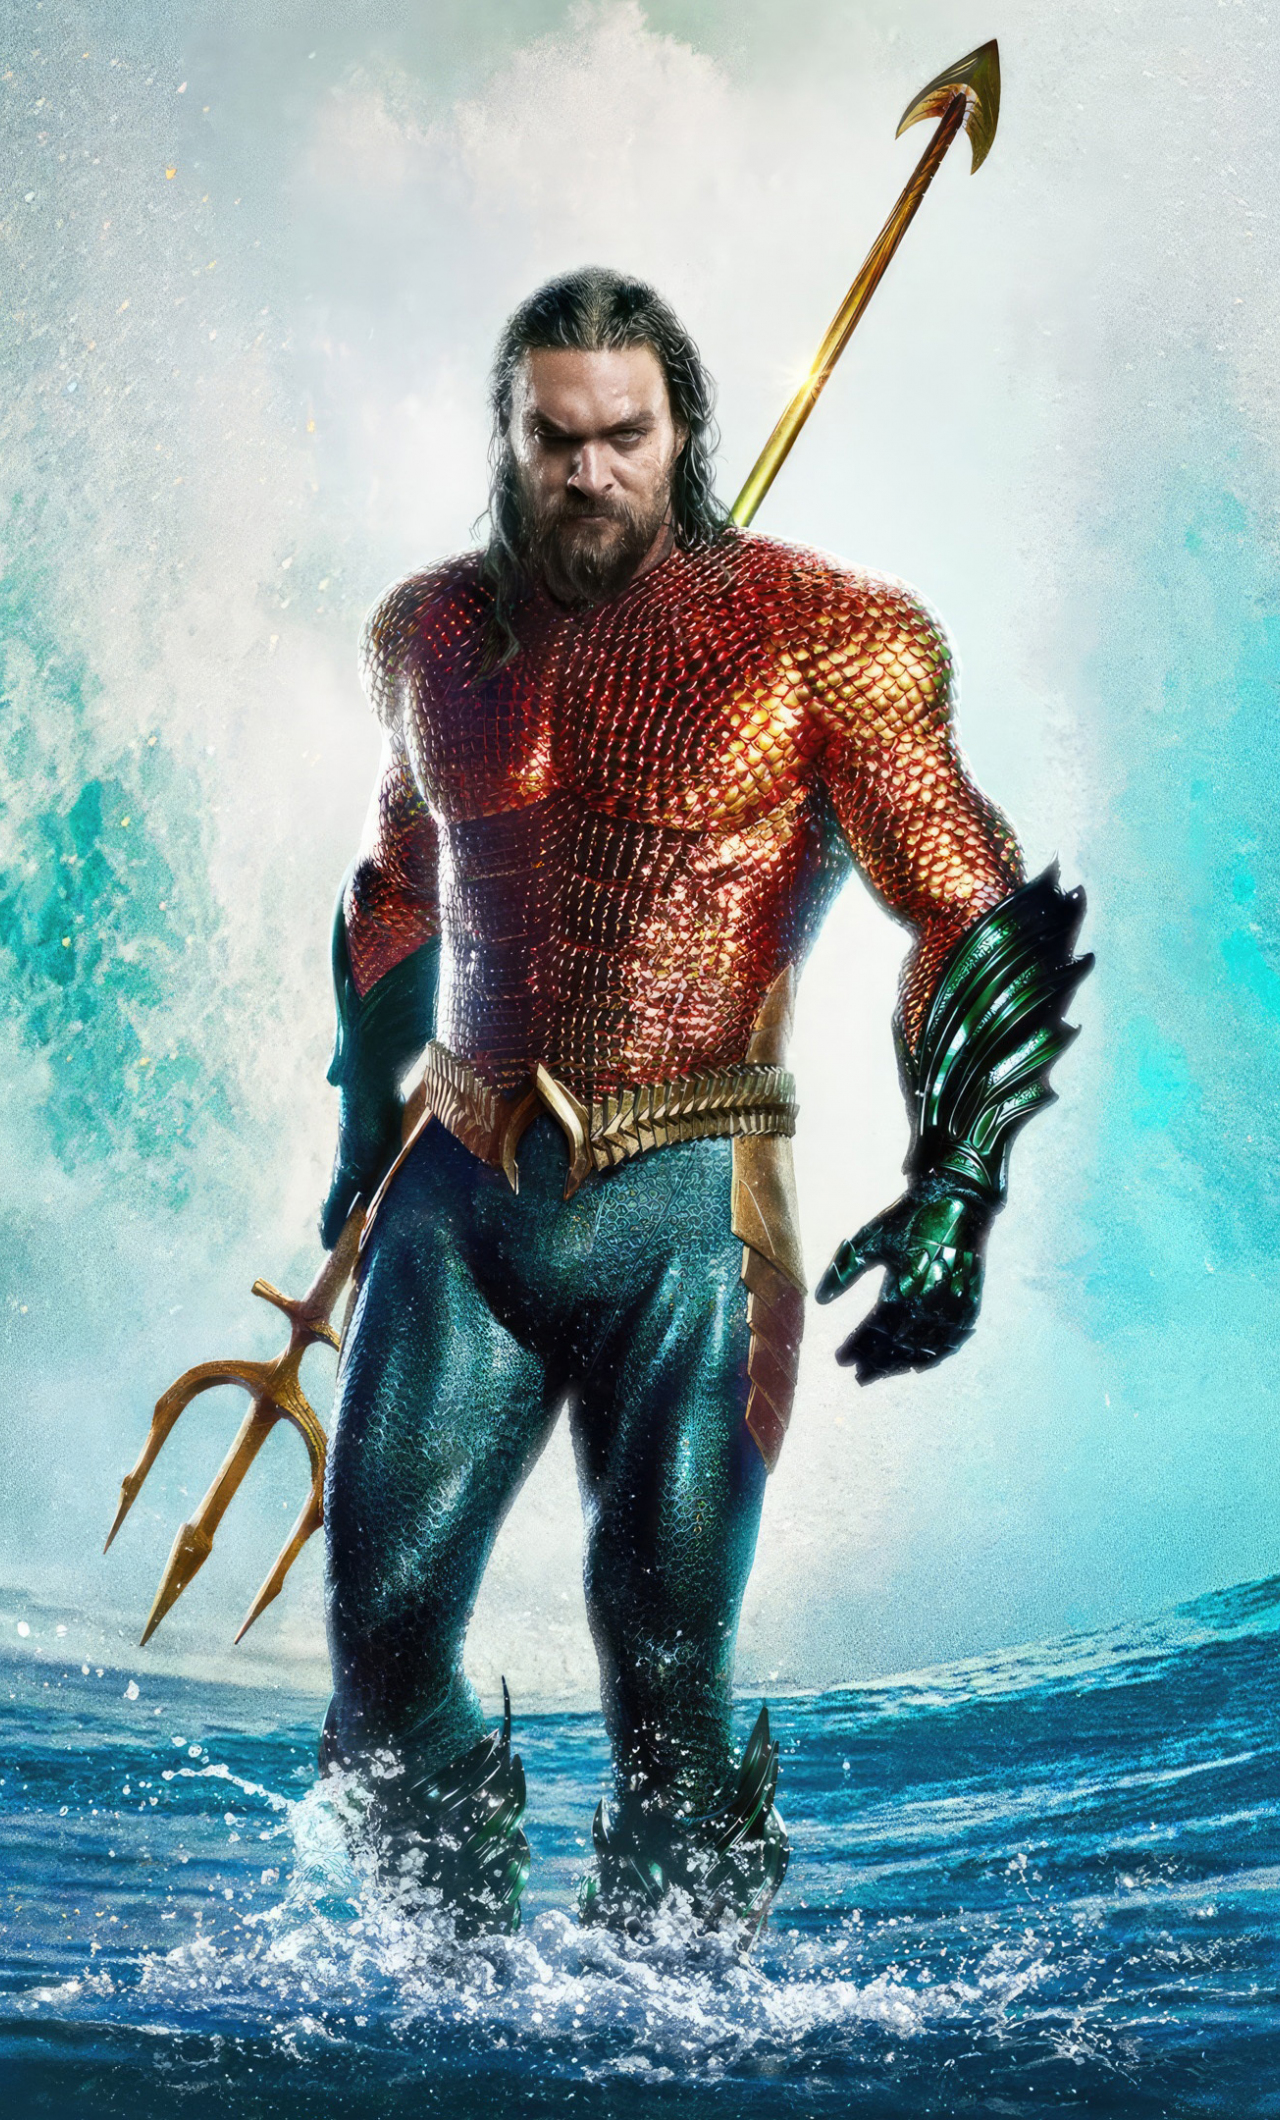 Download wallpaper 1280x2120 aquaman and the lost kingdom, an upcoming movie from dc, iphone 6 plus, 1280x2120 HD background, 30151